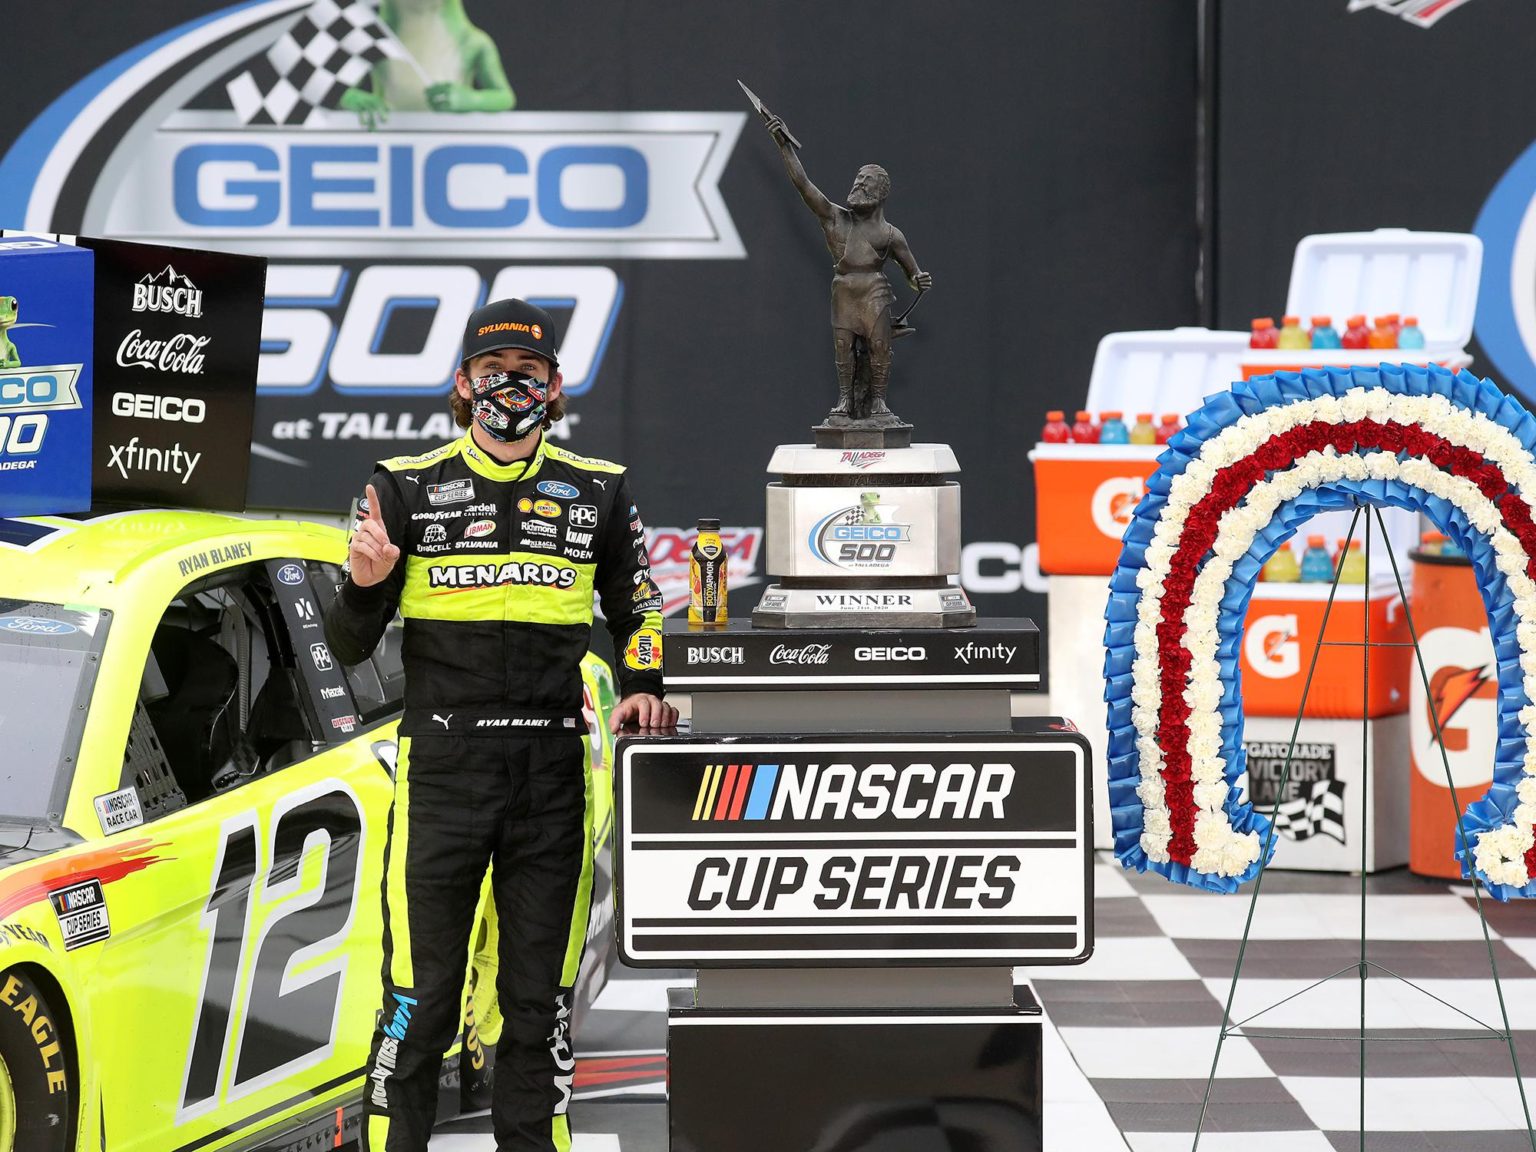 Ryan Blaney, driver of the #12 Menards/Sylvania Ford, celebrates in Victory Lane after winning the NASCAR Cup Series GEICO 500 at Talladega Superspeedway on June 22, 2020 in Talladega, Alabama.